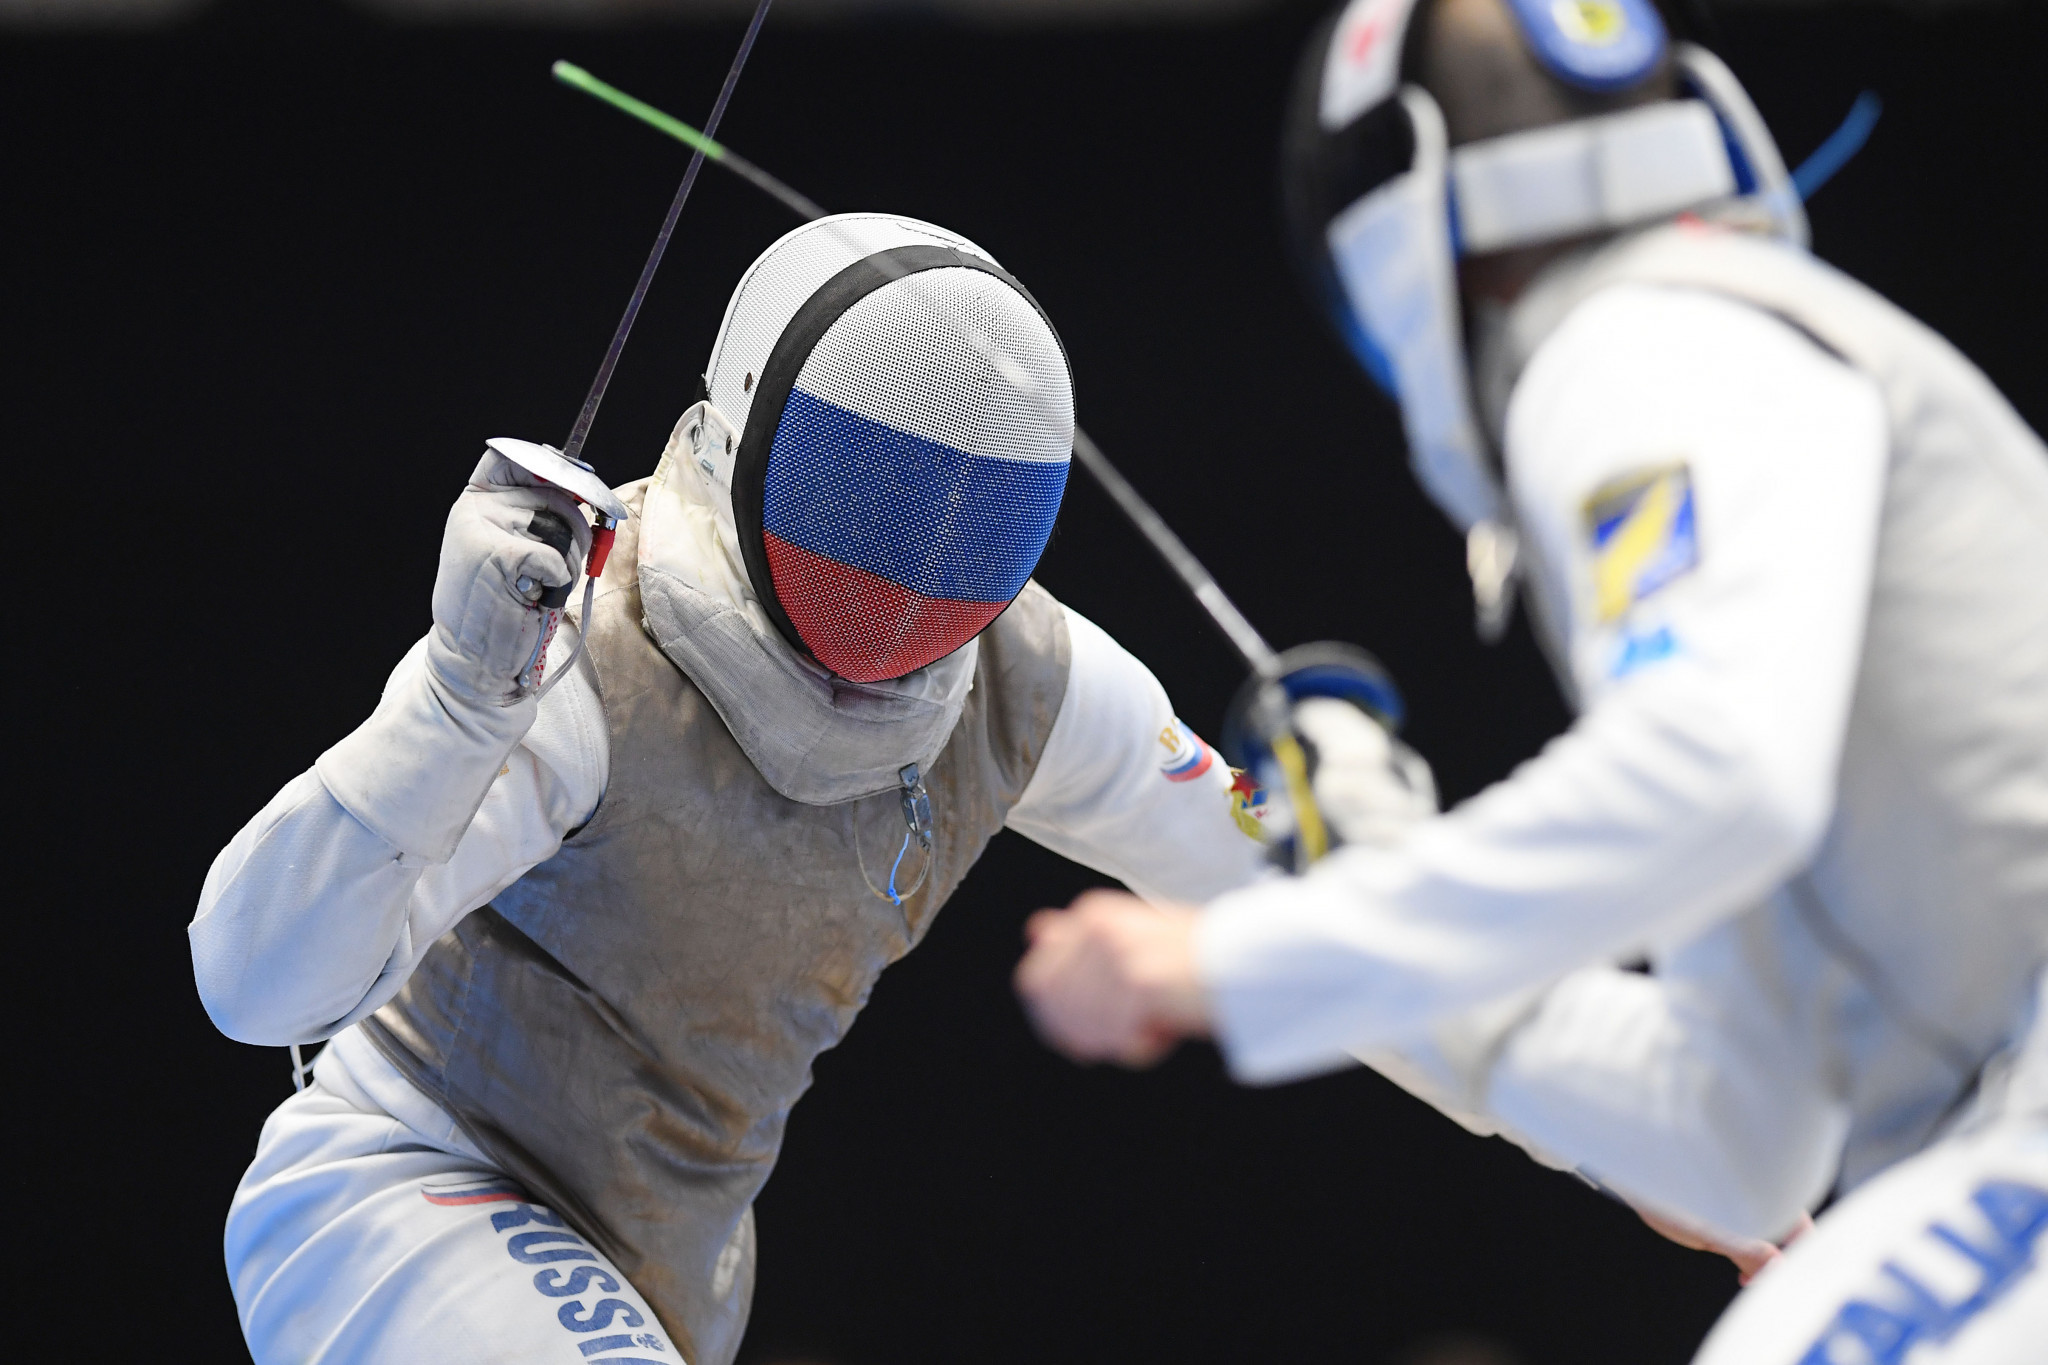 Russian fencers are currently banned from competing in FIE-sanctioned competition ©Getty Images